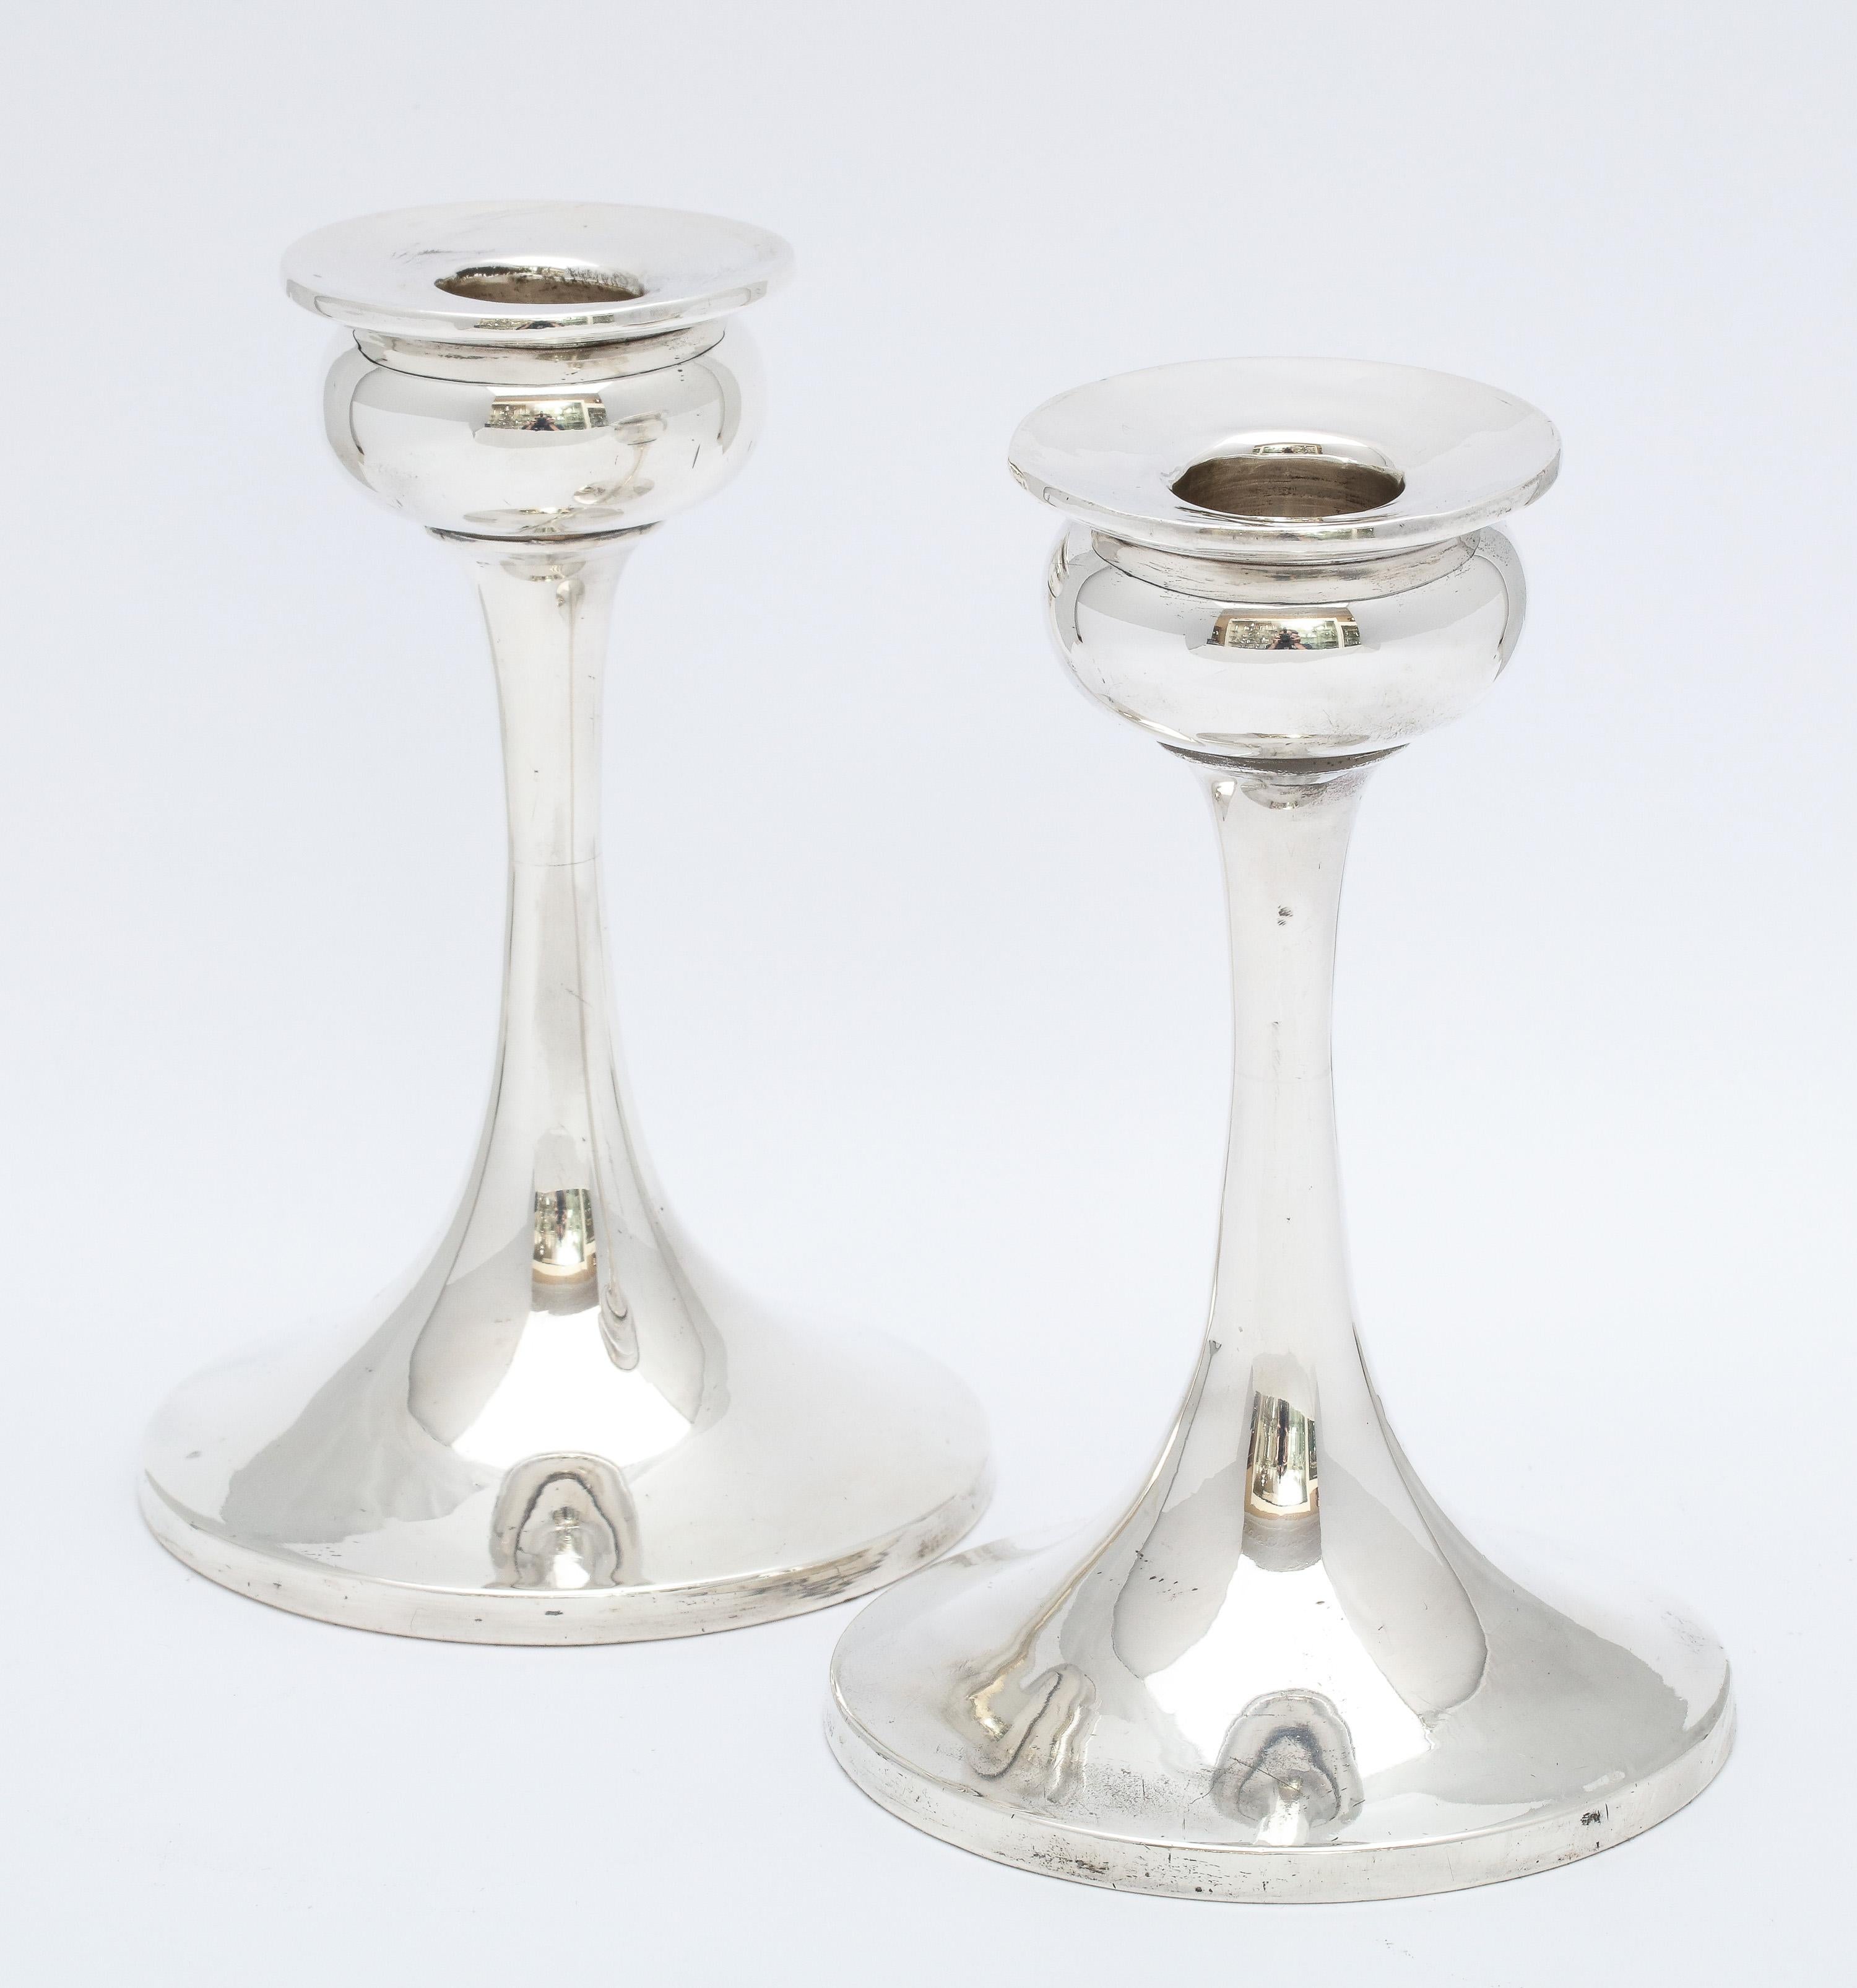 English Pair of Art Nouveau Sterling Silver Candlesticks